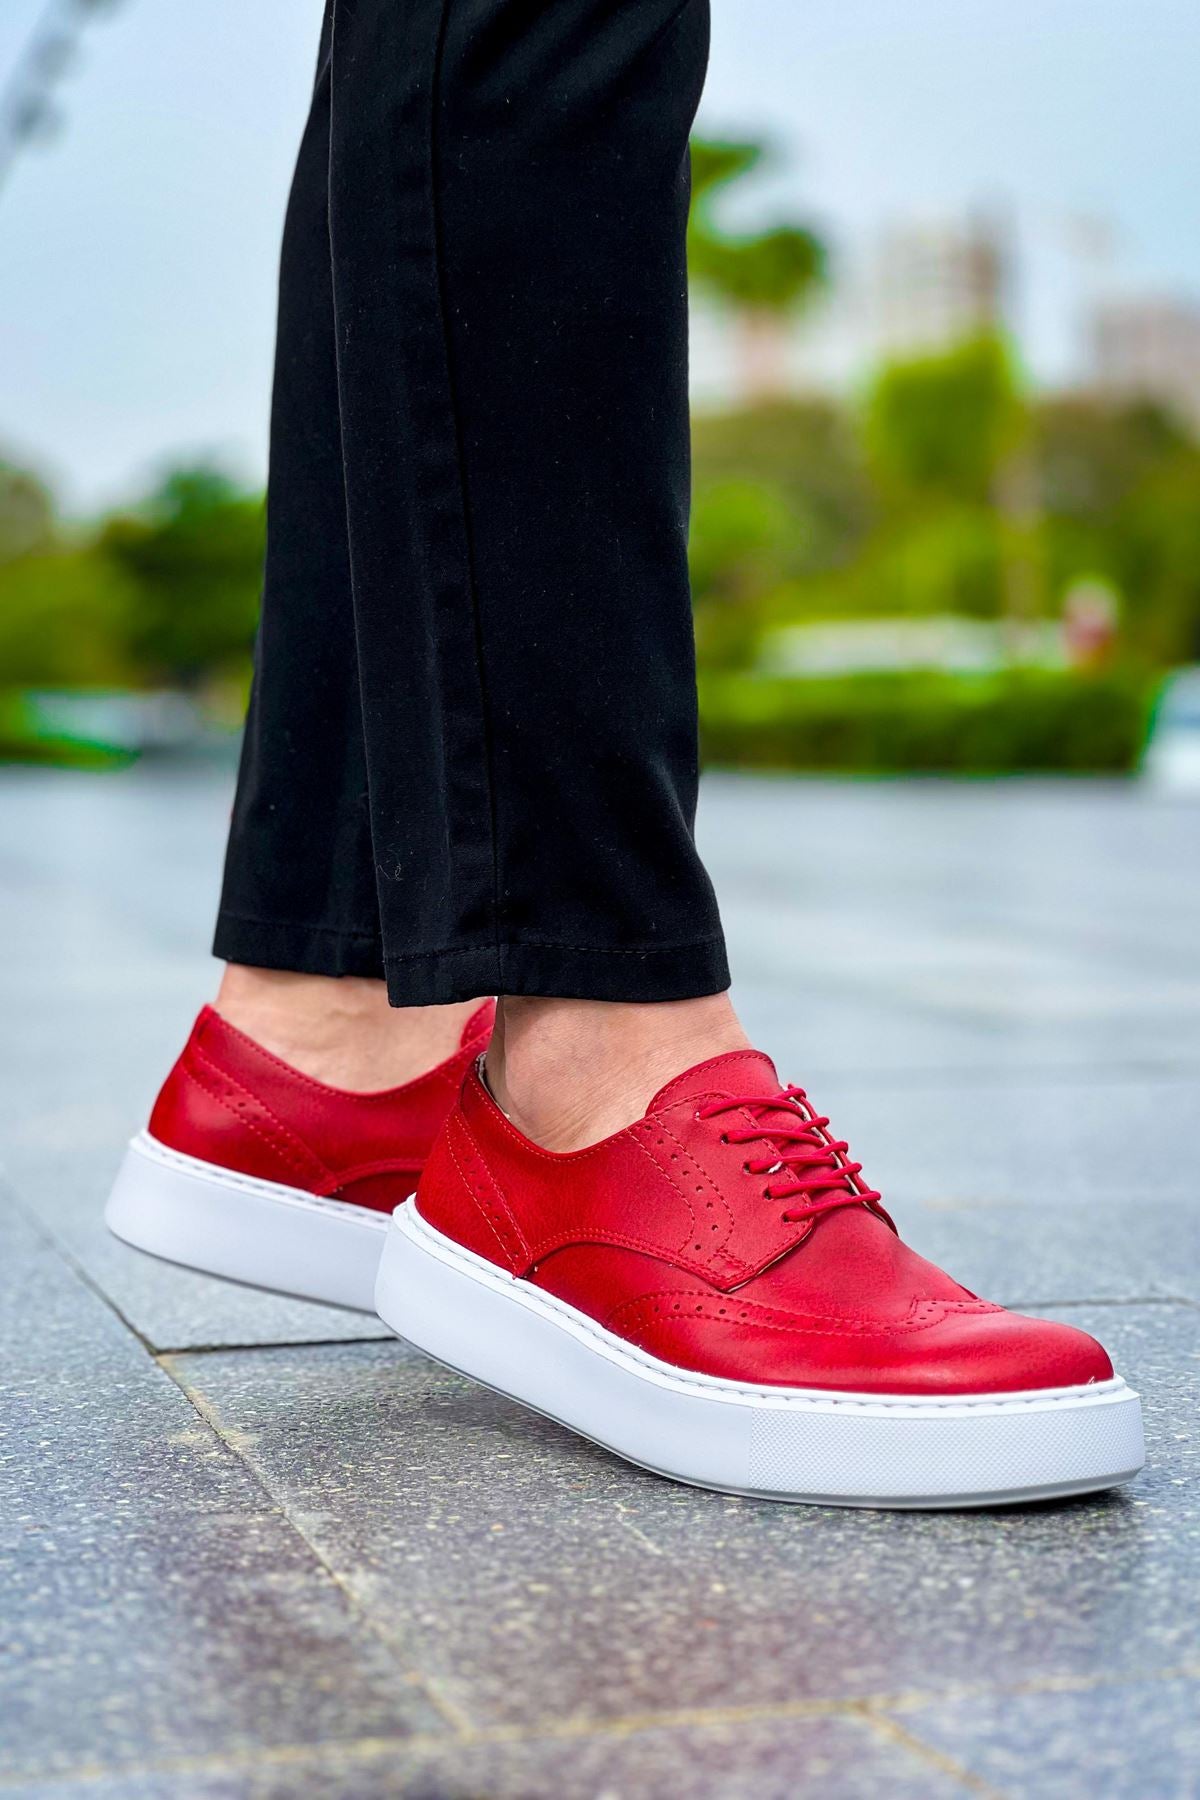 CH149 CBT Changer Over Men's sneakers Shoes RED - STREETMODE ™